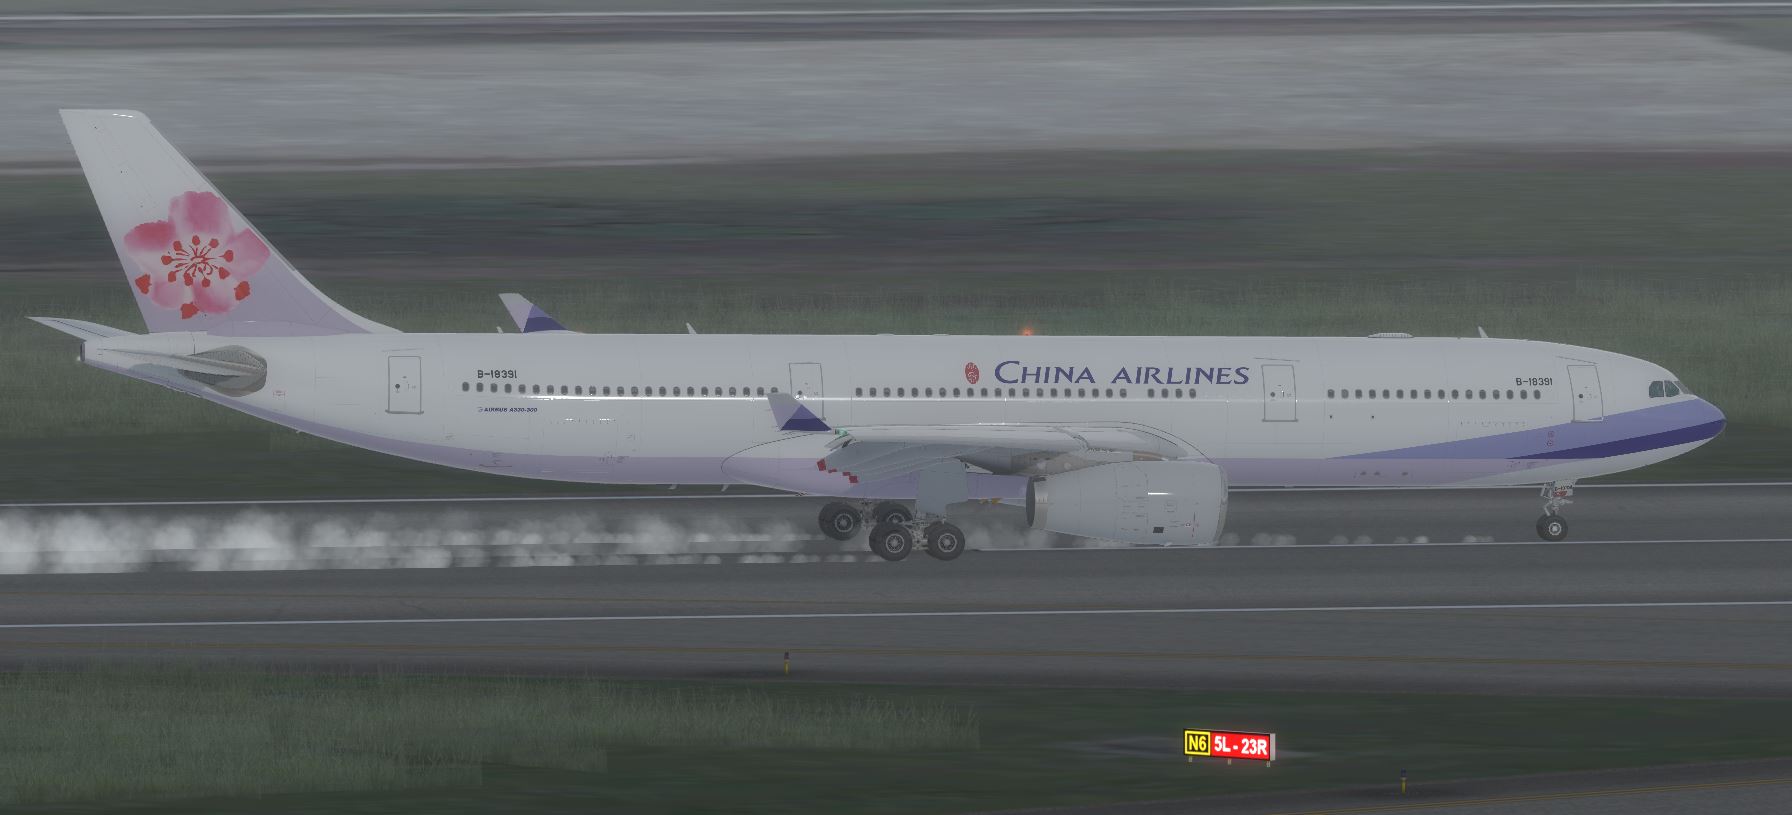 AS A330 ChinaAirline-7361 